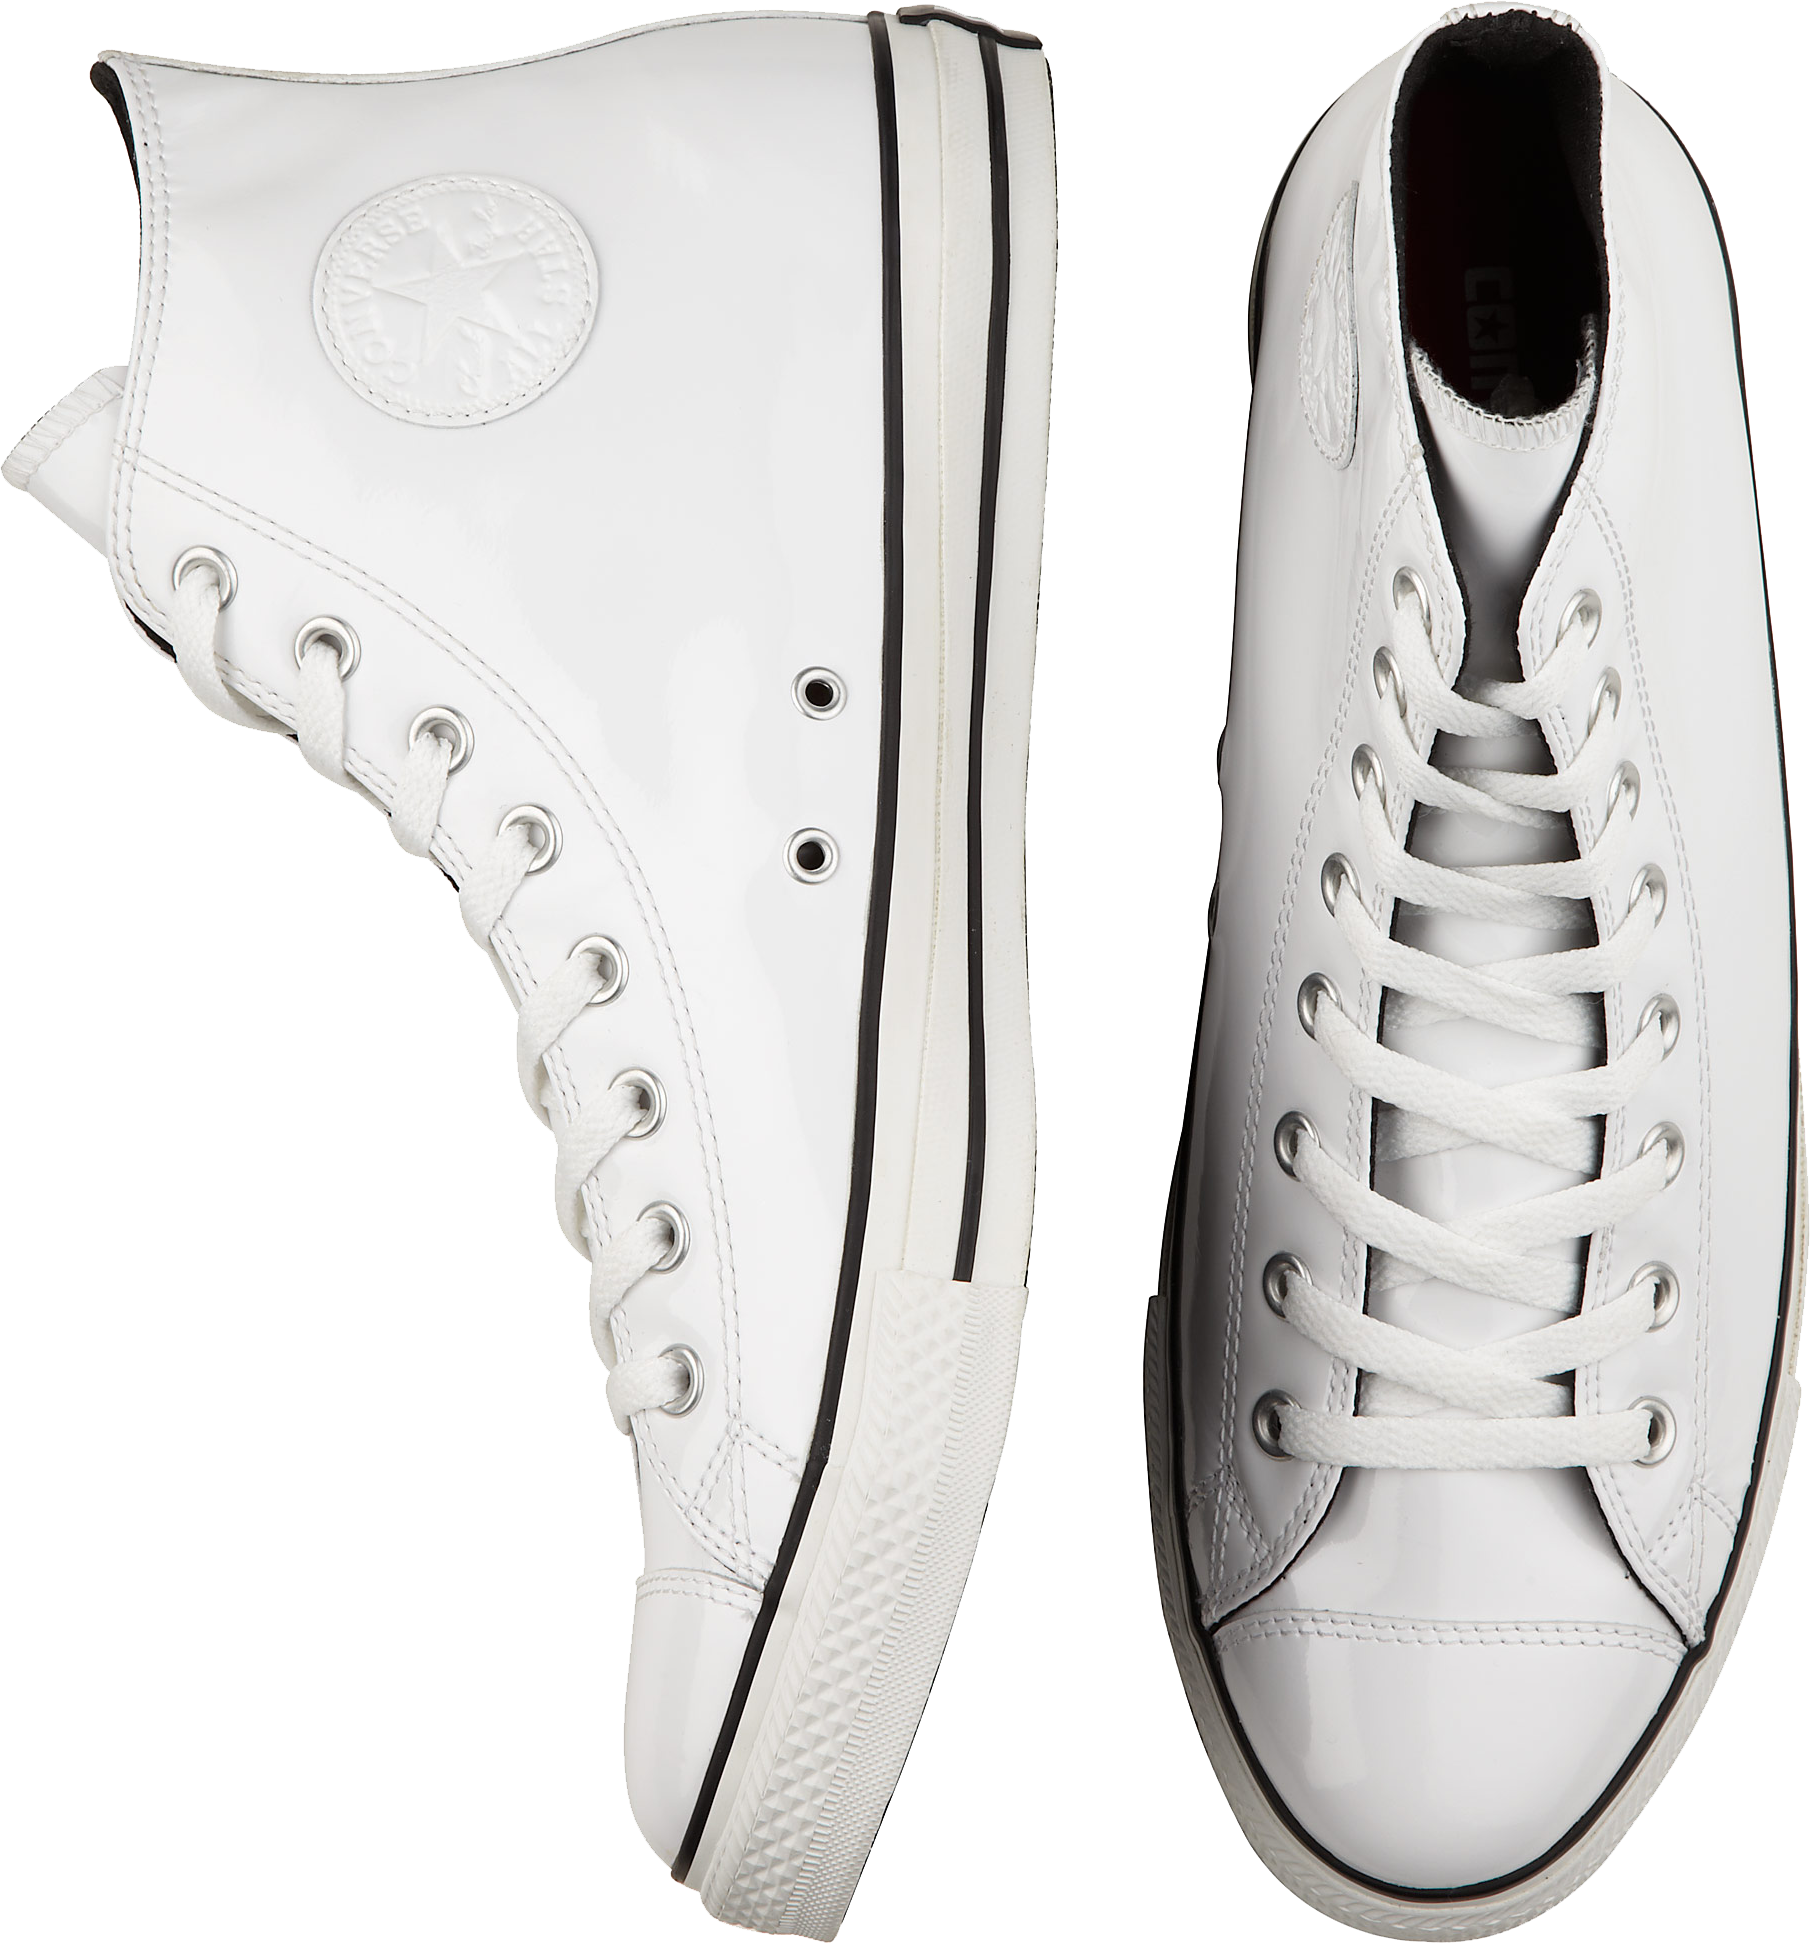 Converse White Leather High Tops Mens Shoes